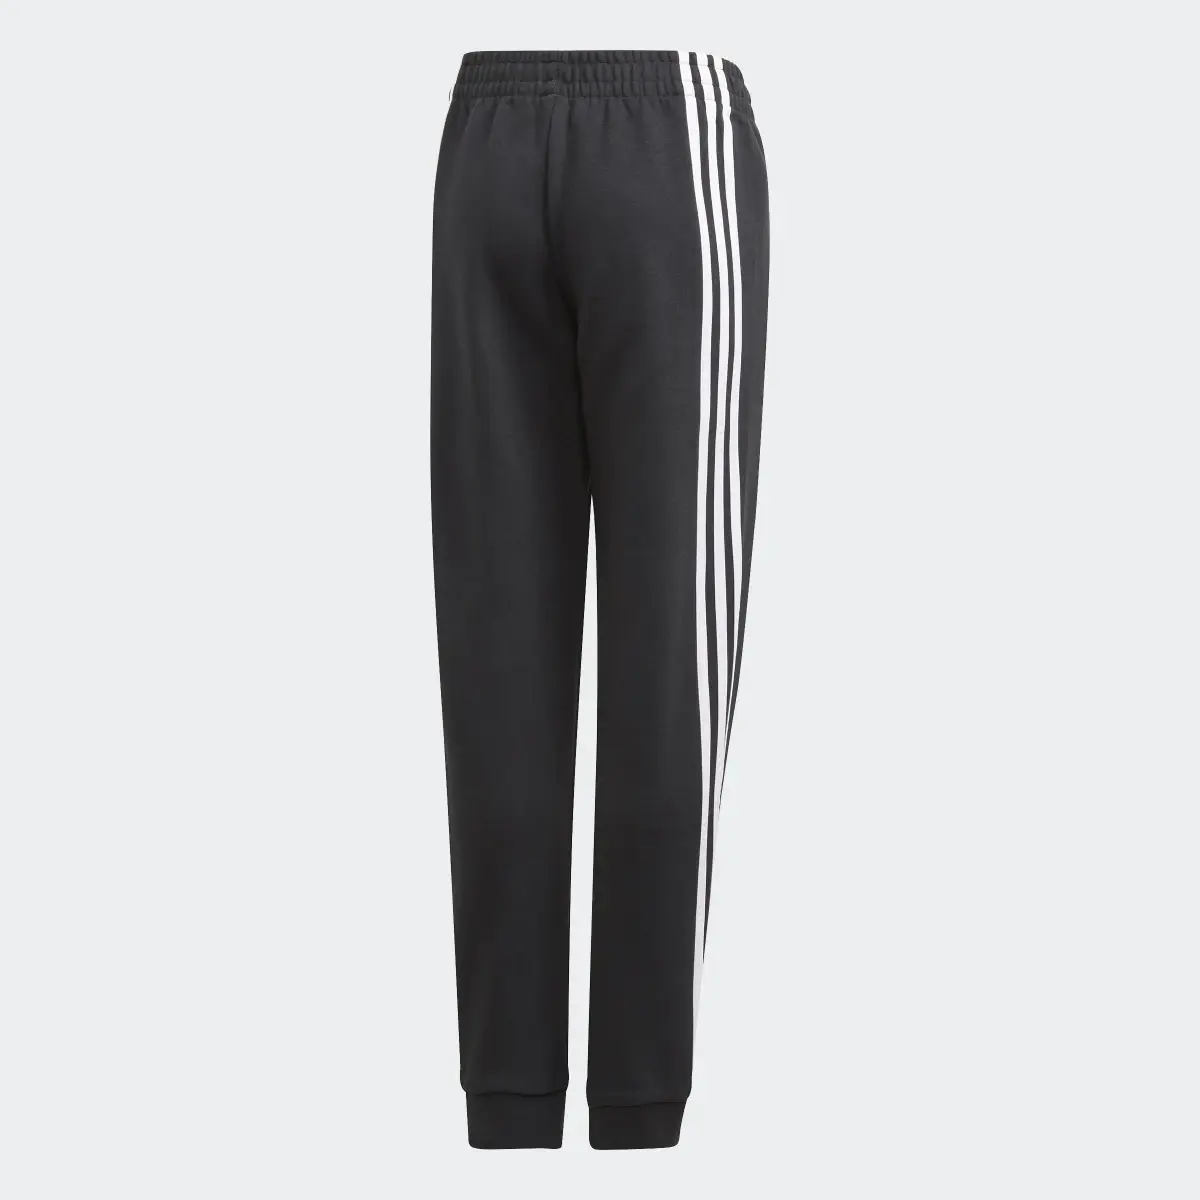 Adidas 3-Stripes Tapered Leg Tracksuit Bottoms. 2